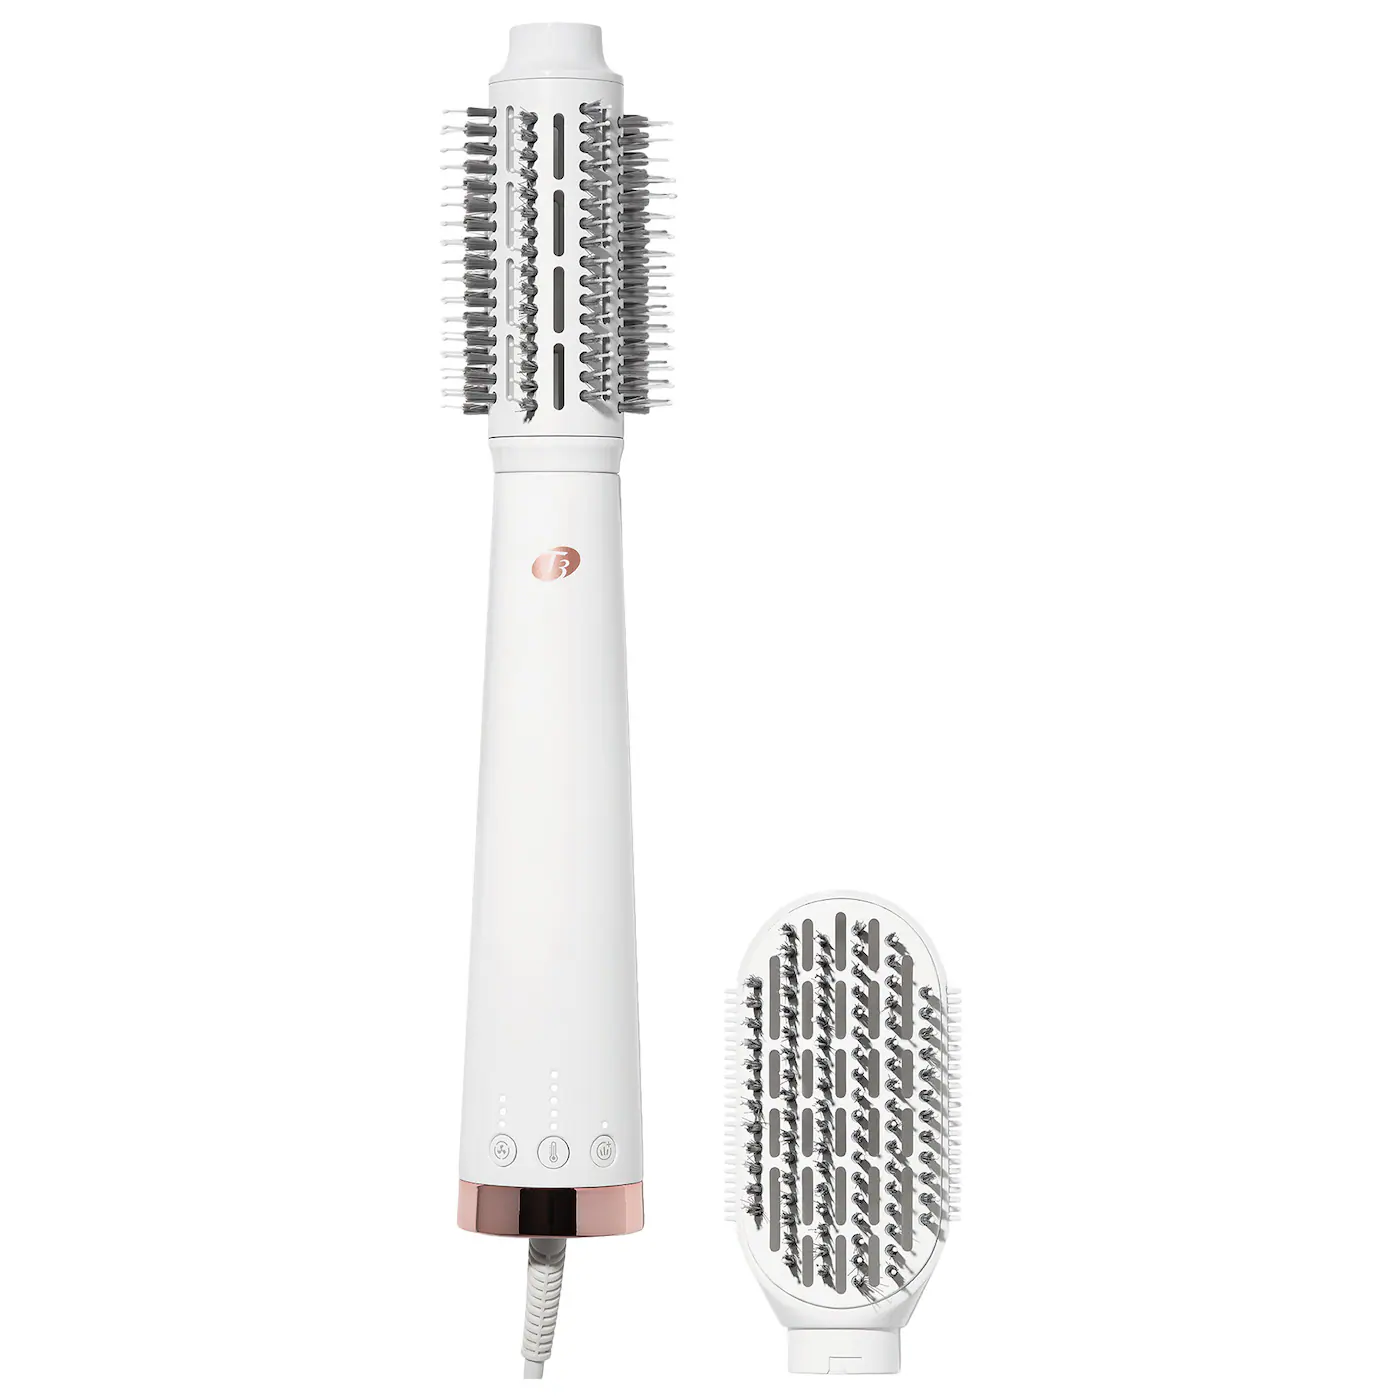 T3 AireBrush Duo Interchangeable Hot Air Styler